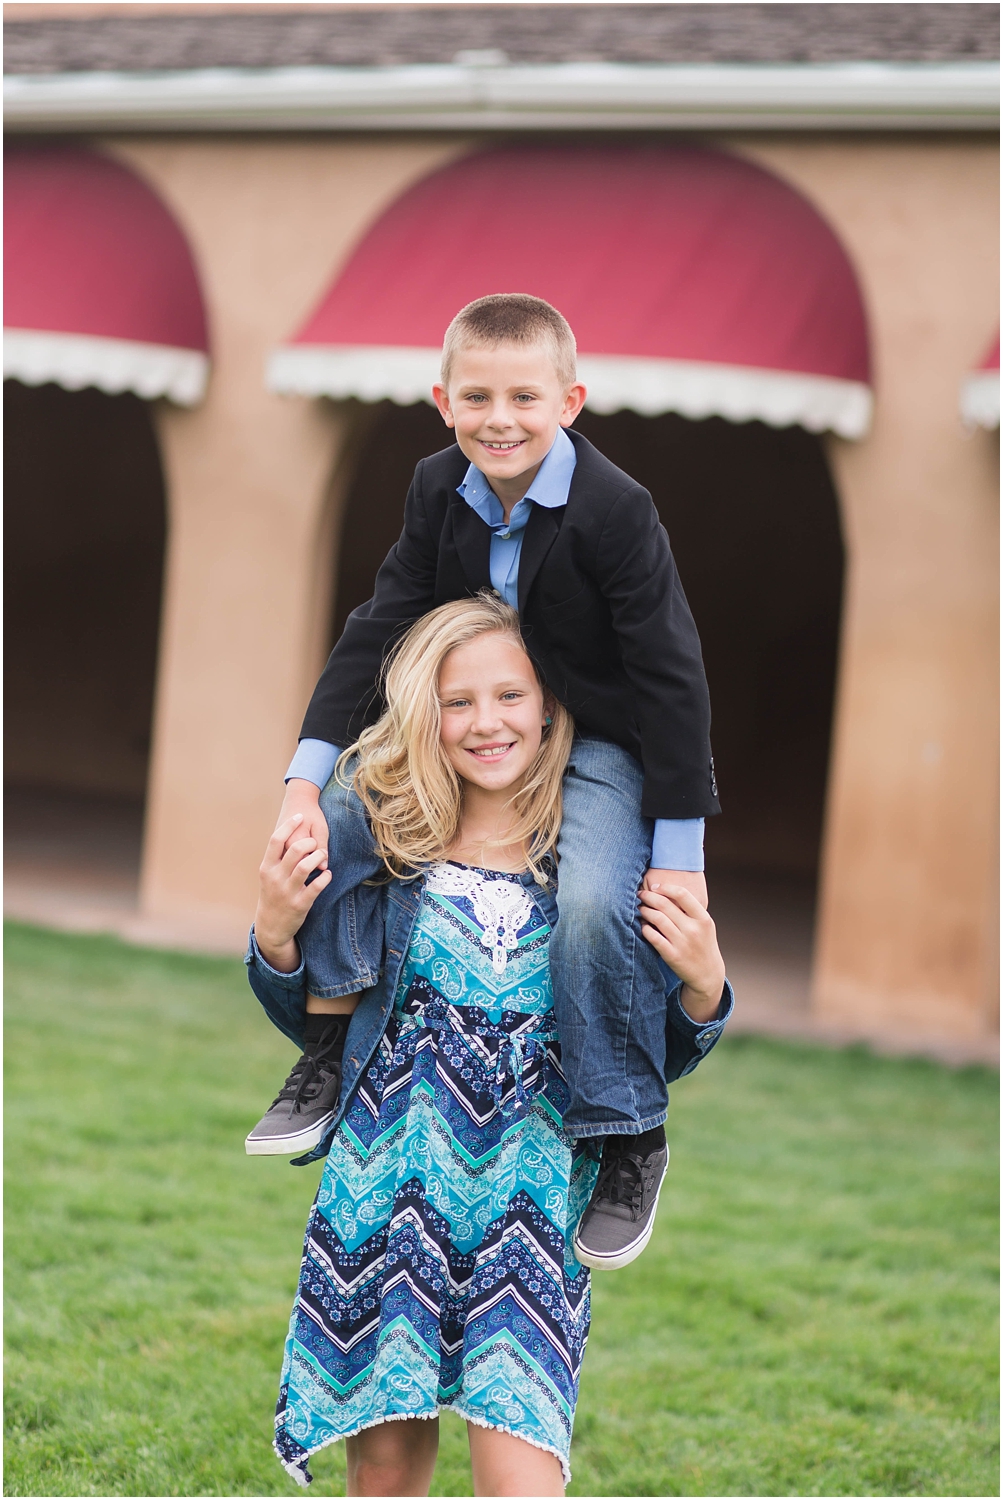 Family Photography in Albuquerque NM at Hartnett Park | Family of four with dog photo session